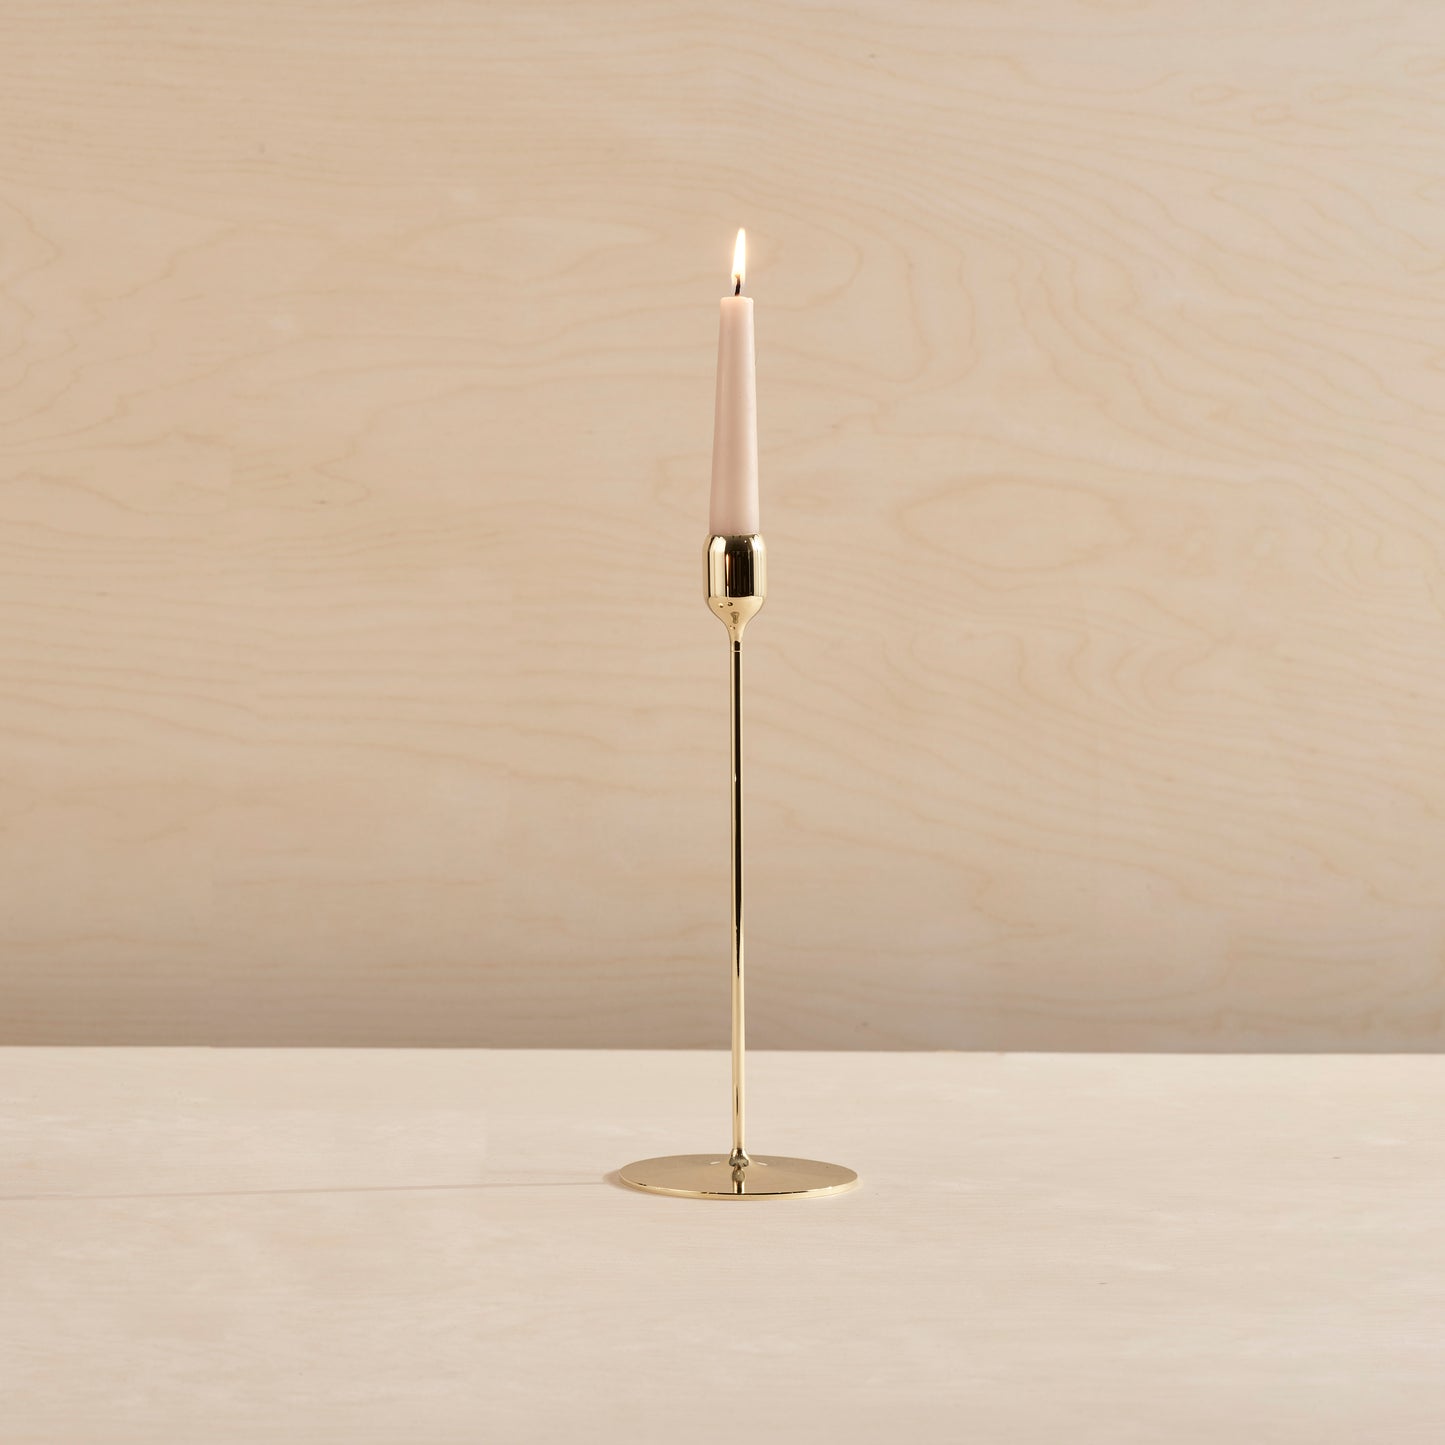 Flute solid brass candlestick, Polished finish